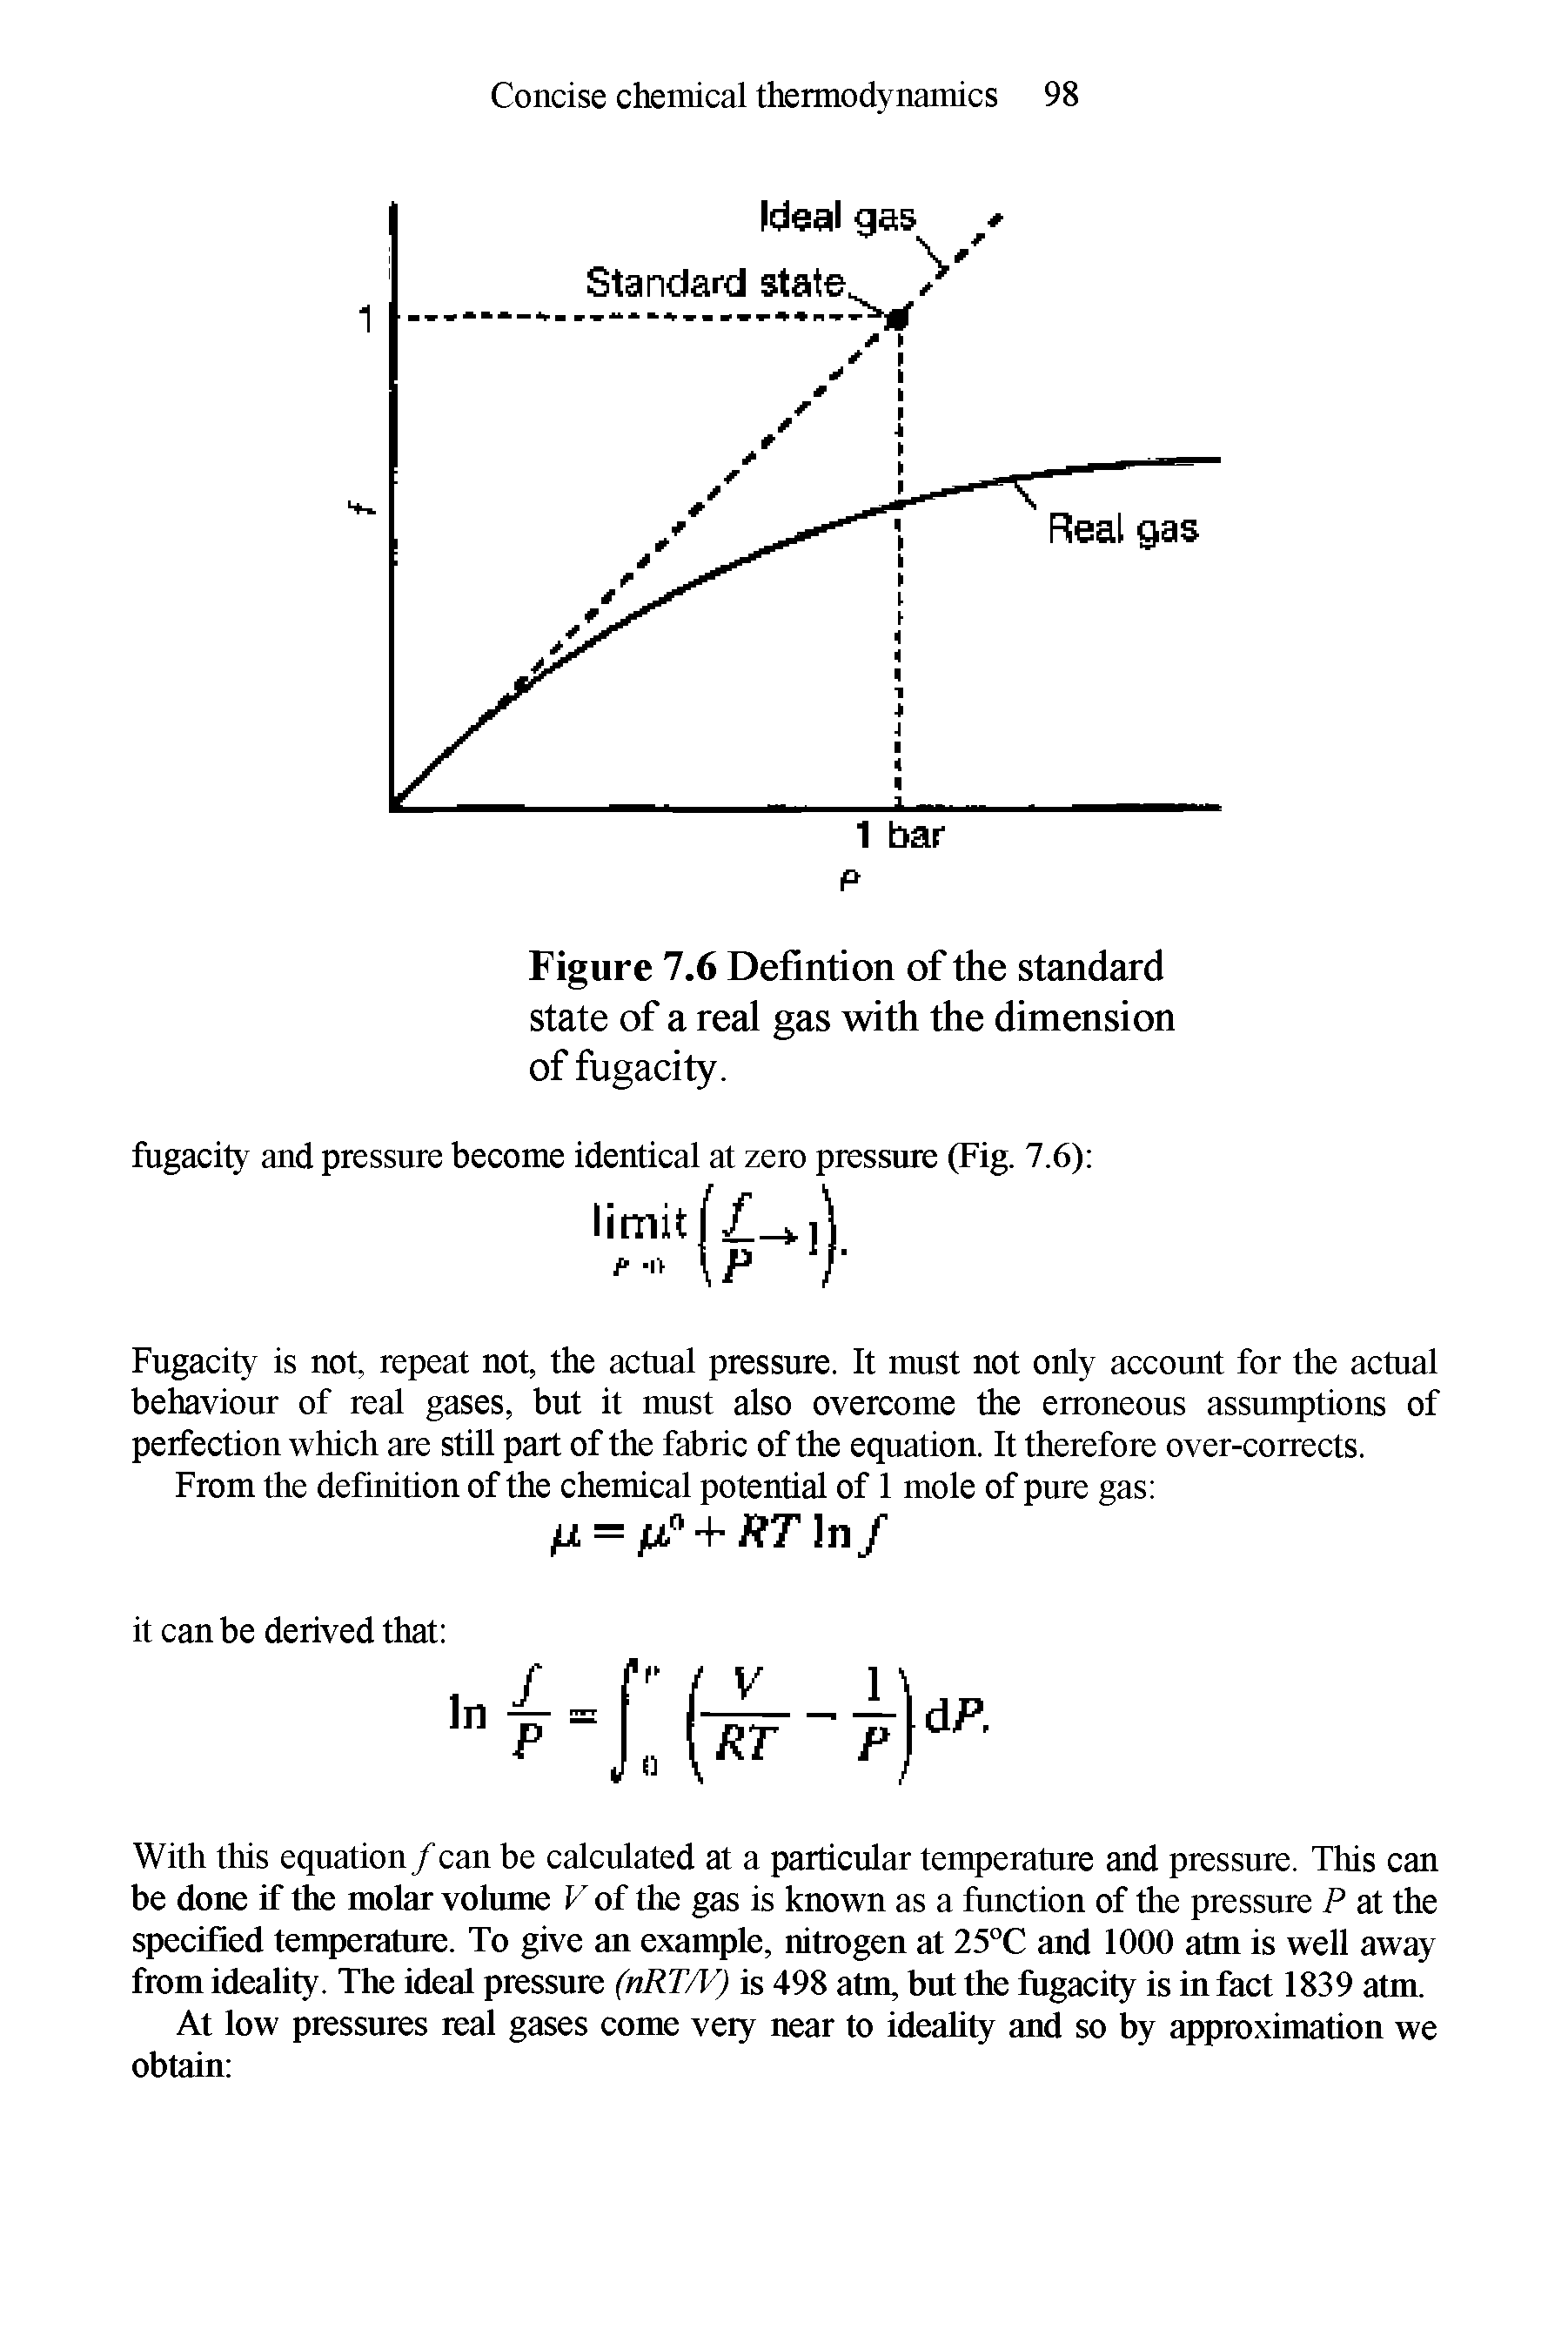 Figure 7.6 Defmtion of the standard state of a real gas with the dimension of fugacity.